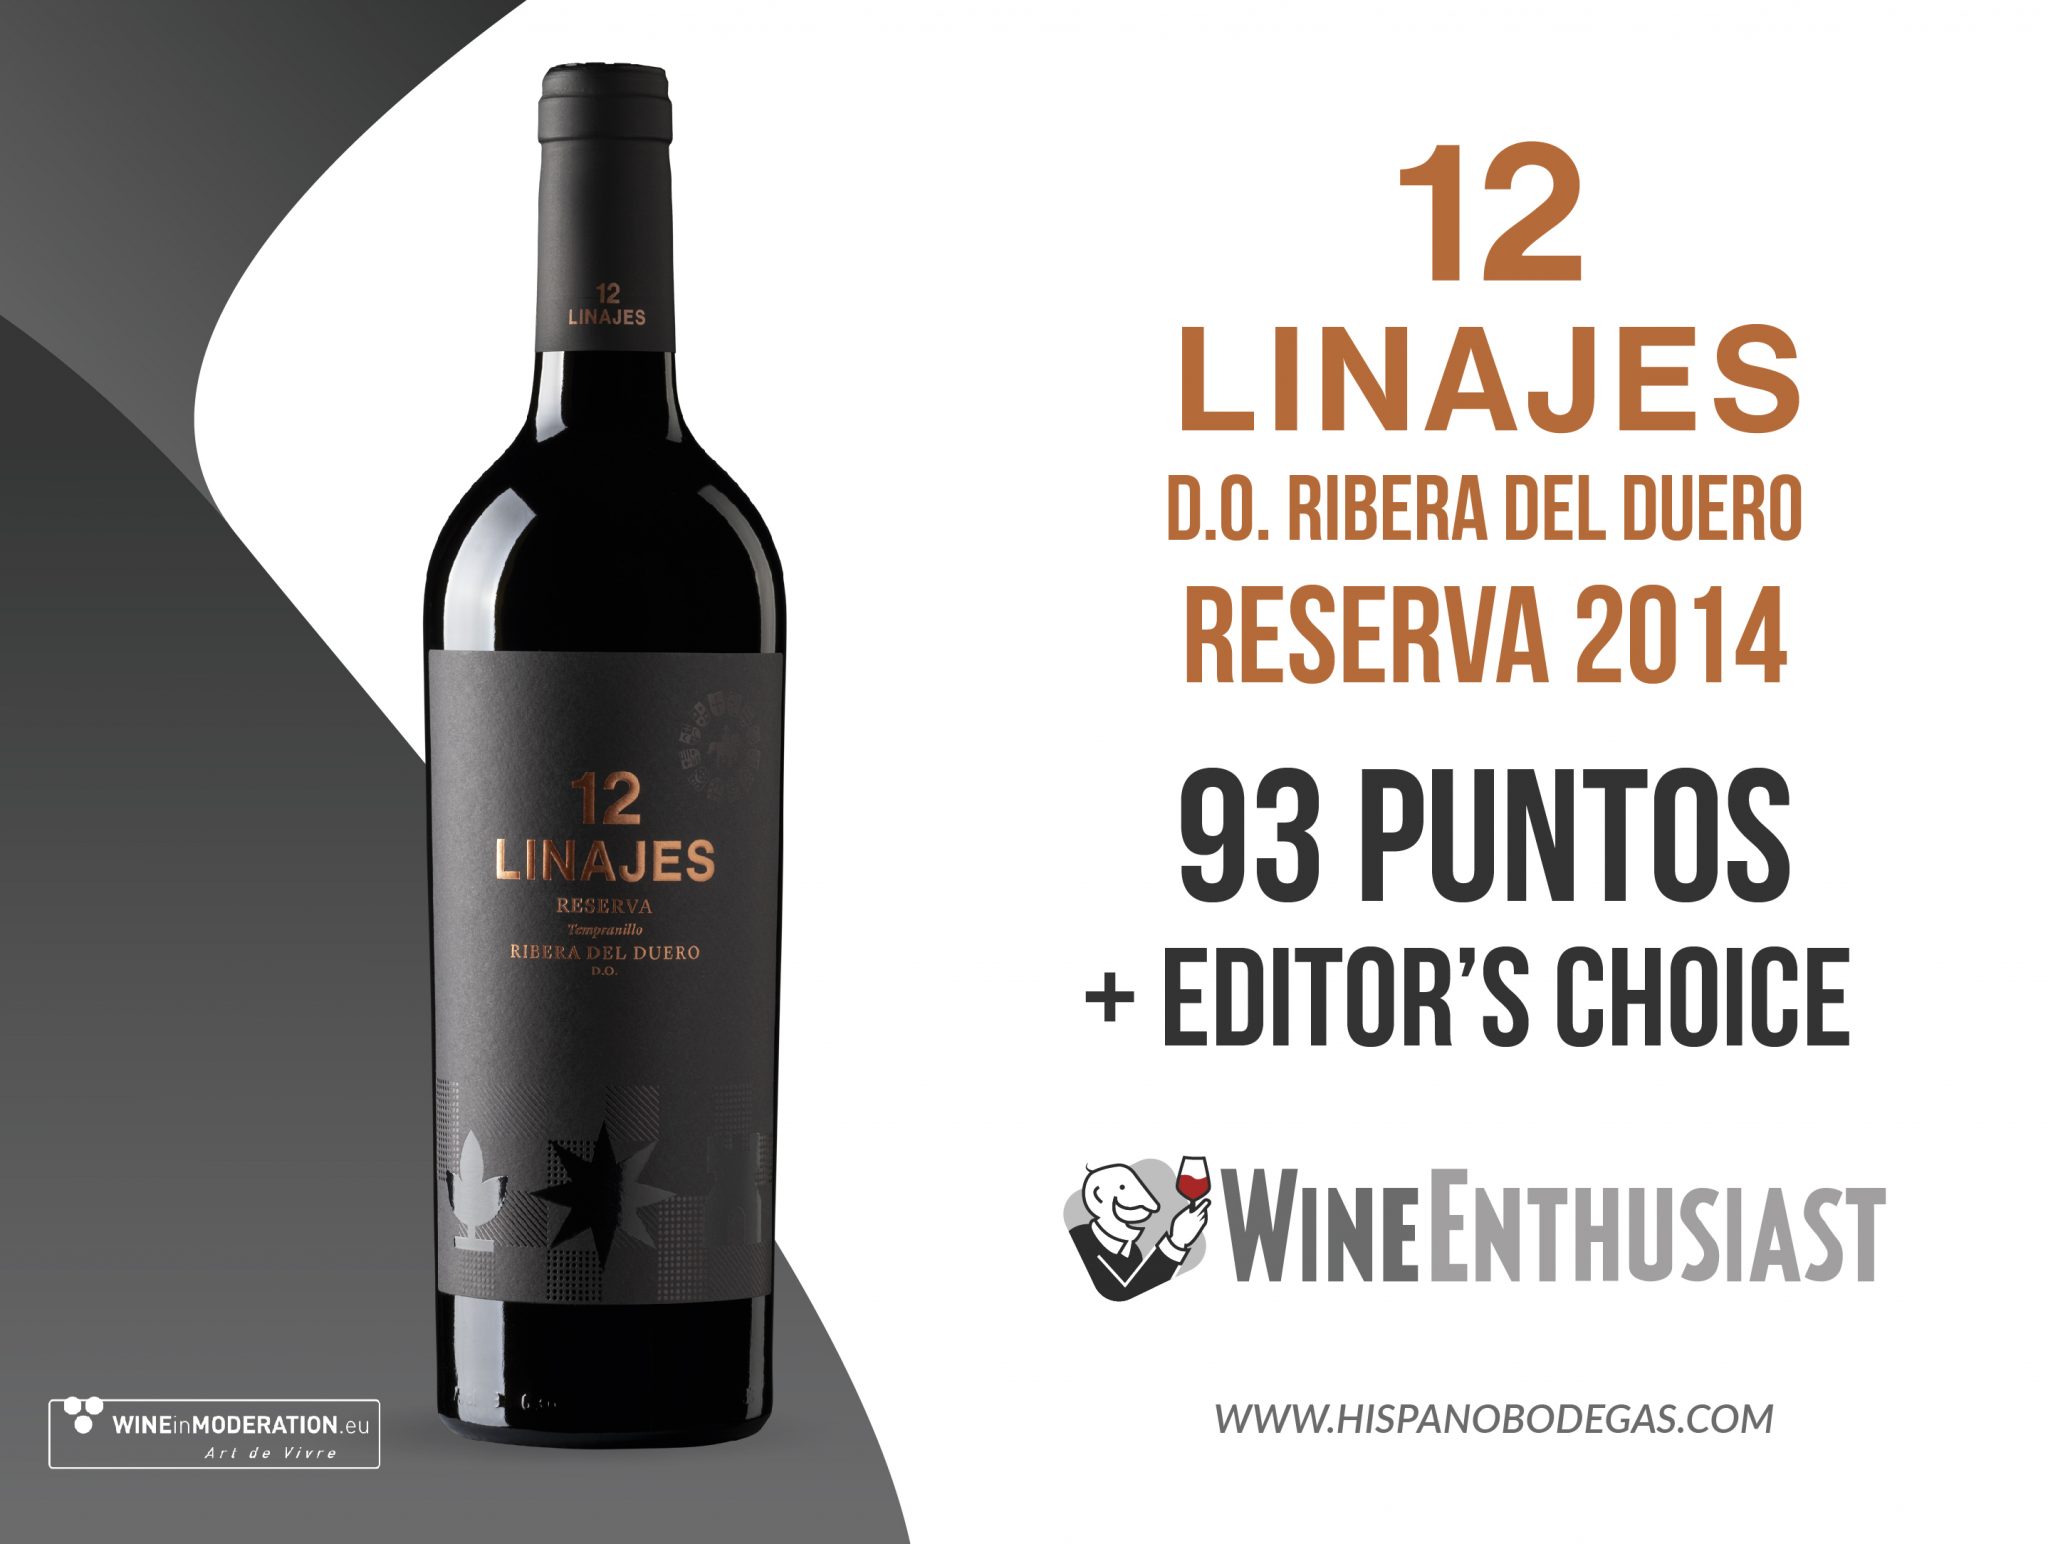 12 Linajes Reserva 2014, the only Ribera del Duero with 93 points and “Editor’s Choice” in Wine Enthusiast.